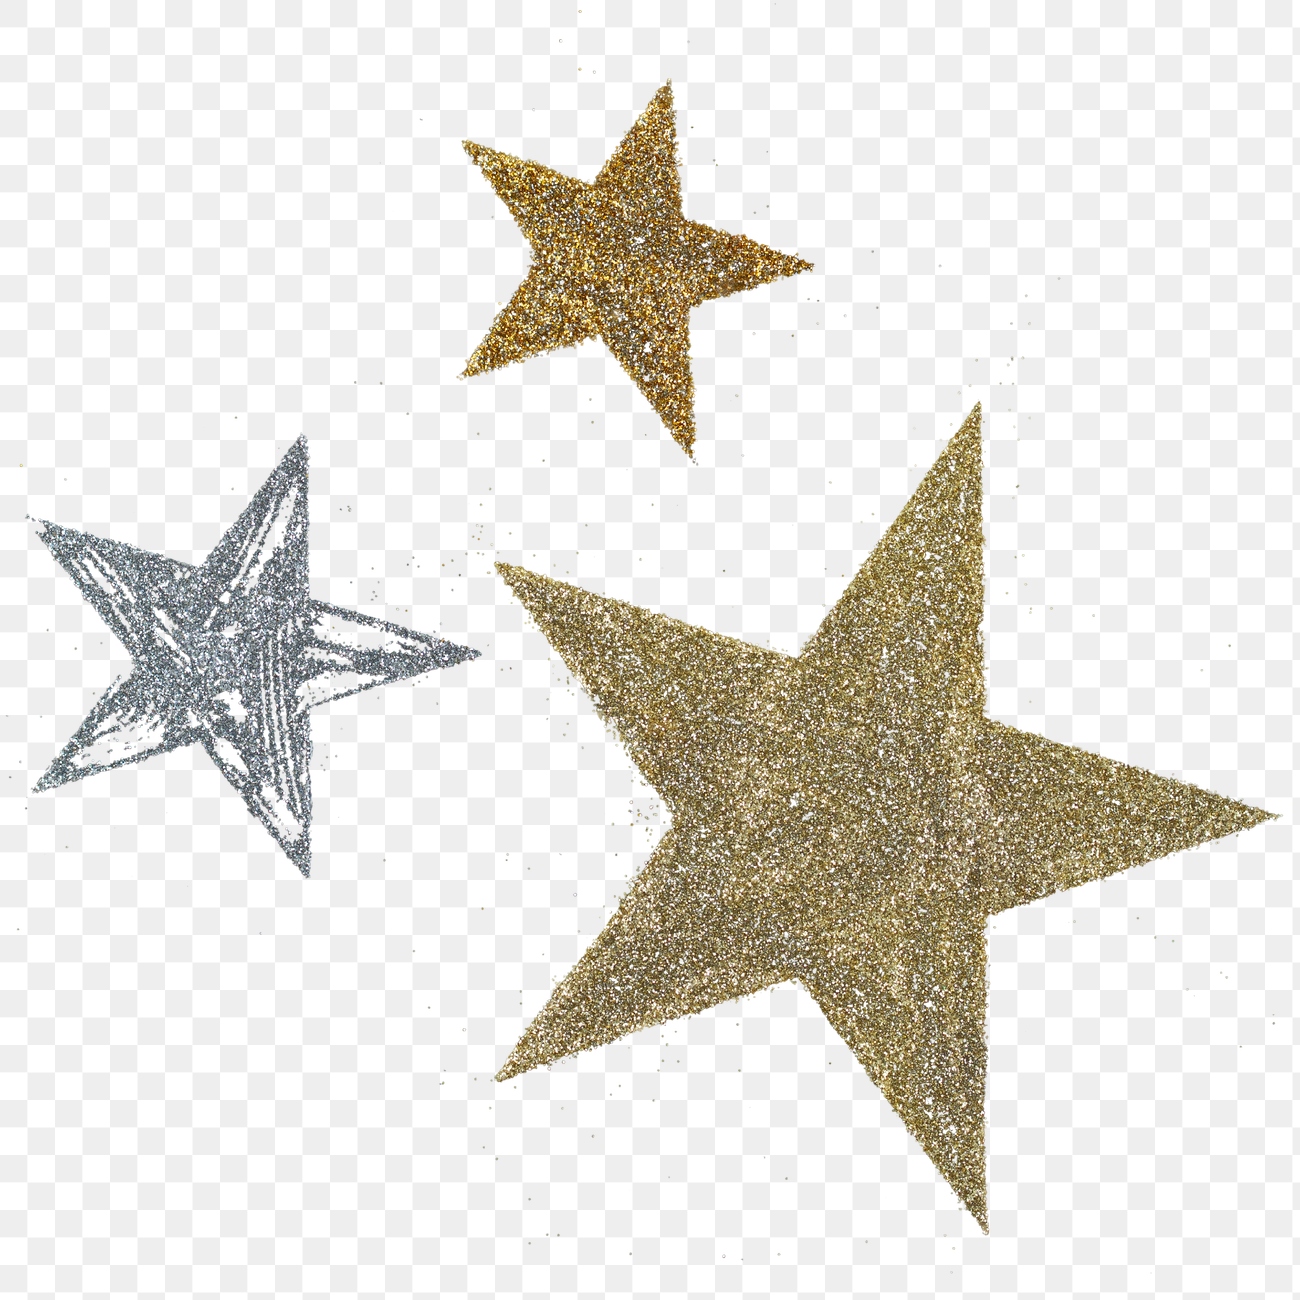 Star | Transparent background PNG image and graphic | rawpixel